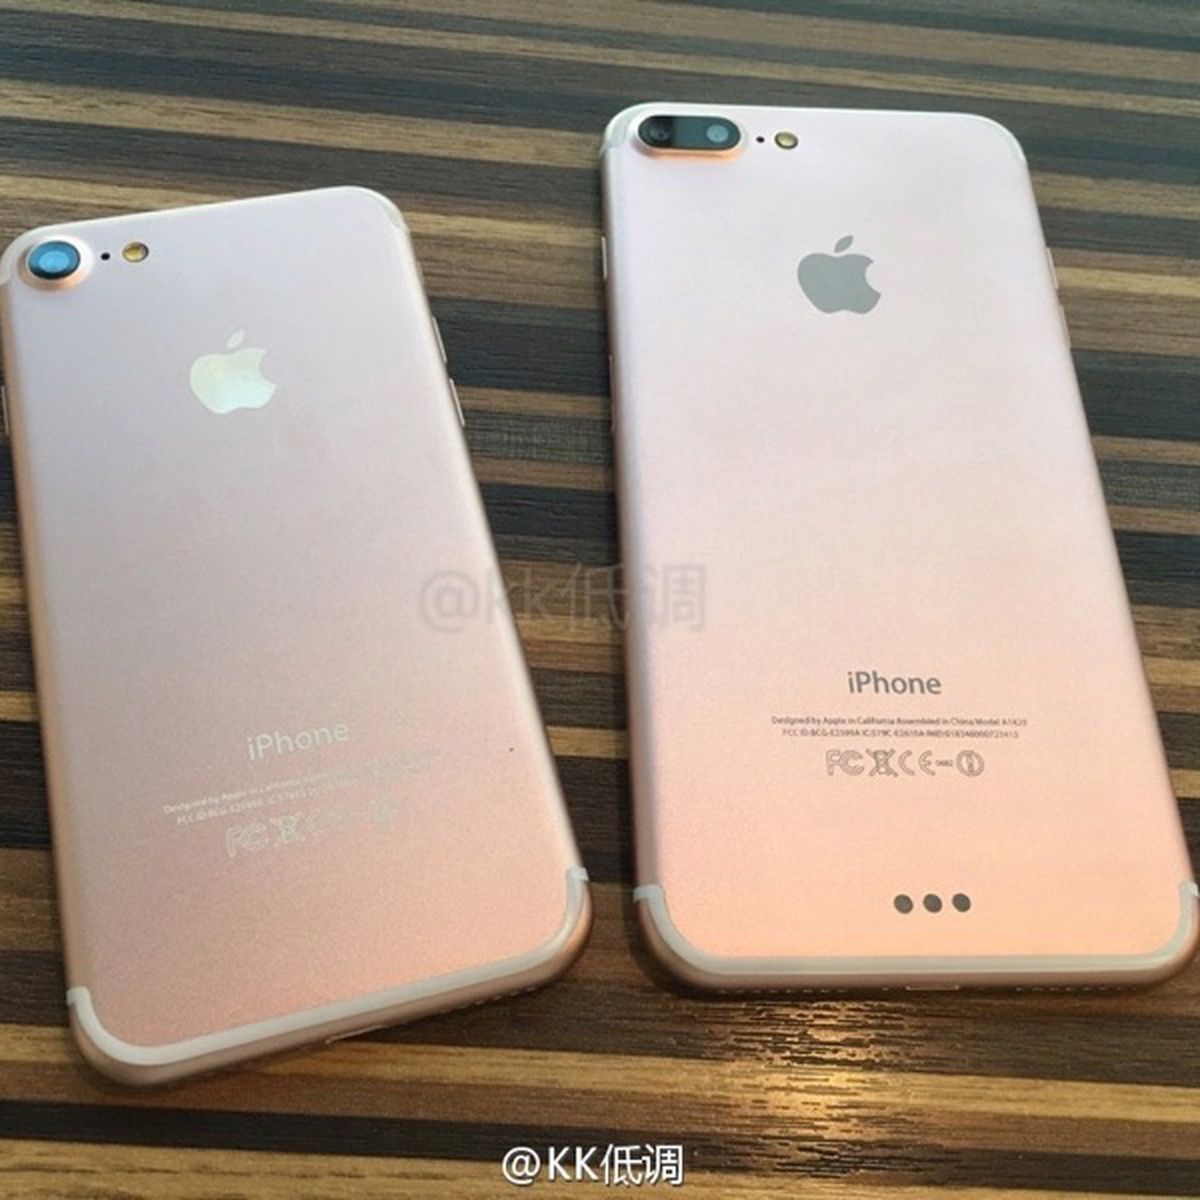 Iphone 7 Series Said To Feature 60fps 4k Video Recording Capability Macrumors